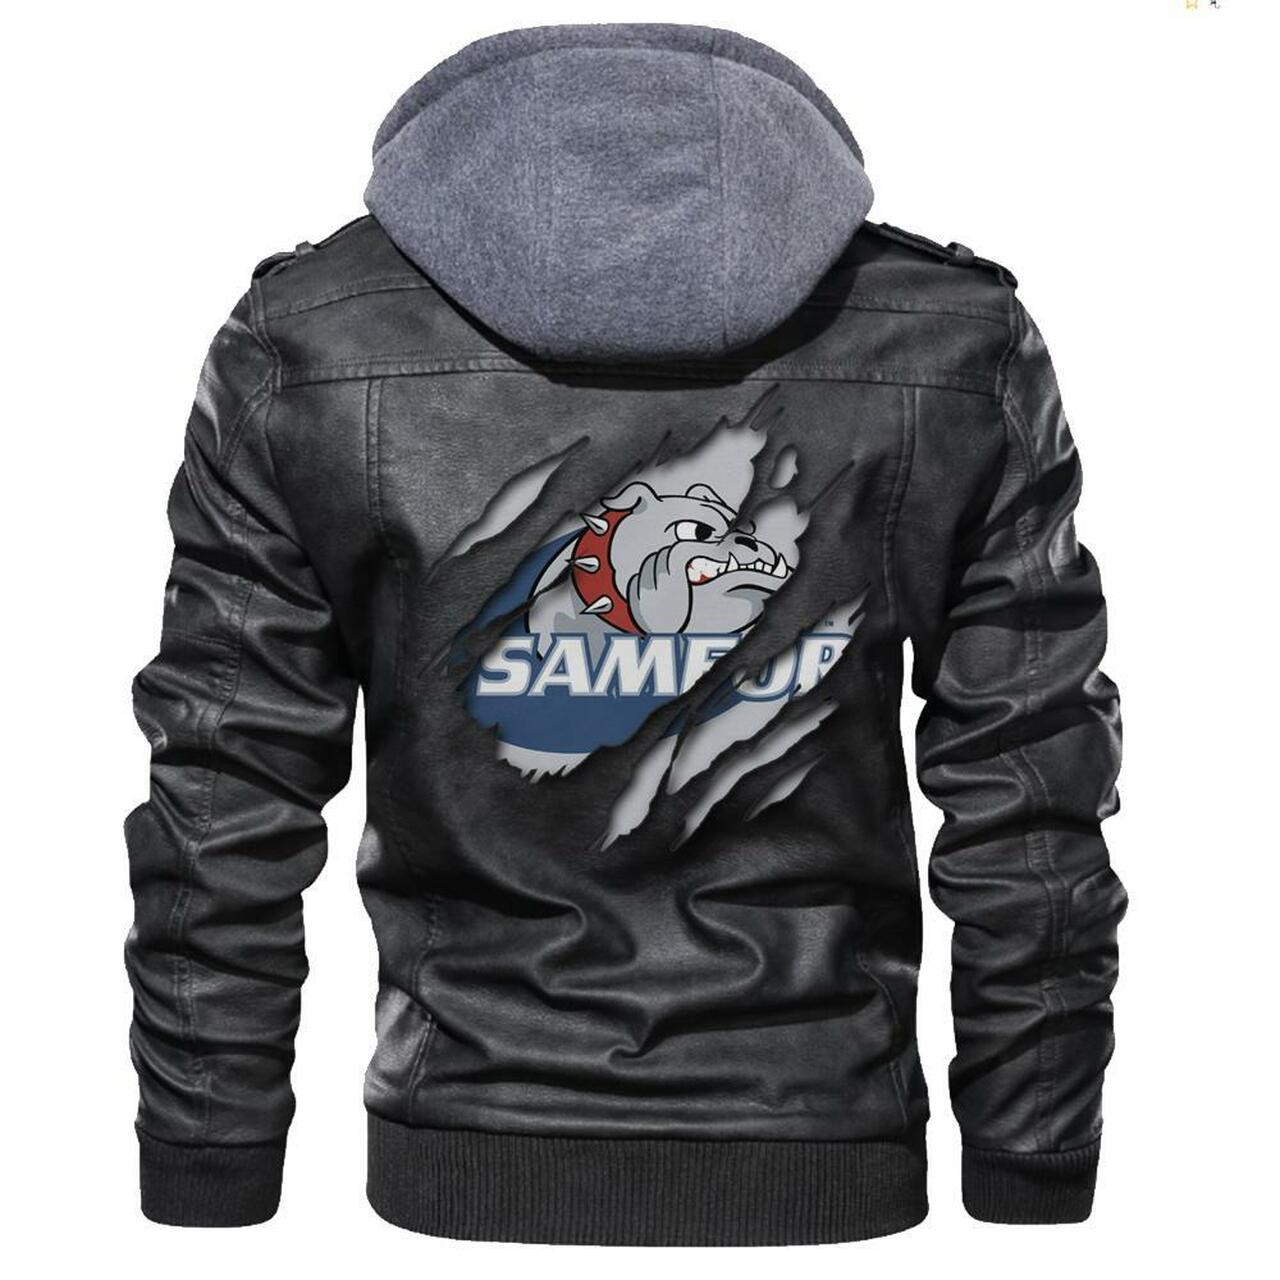 Check out and find the right leather jacket below 249